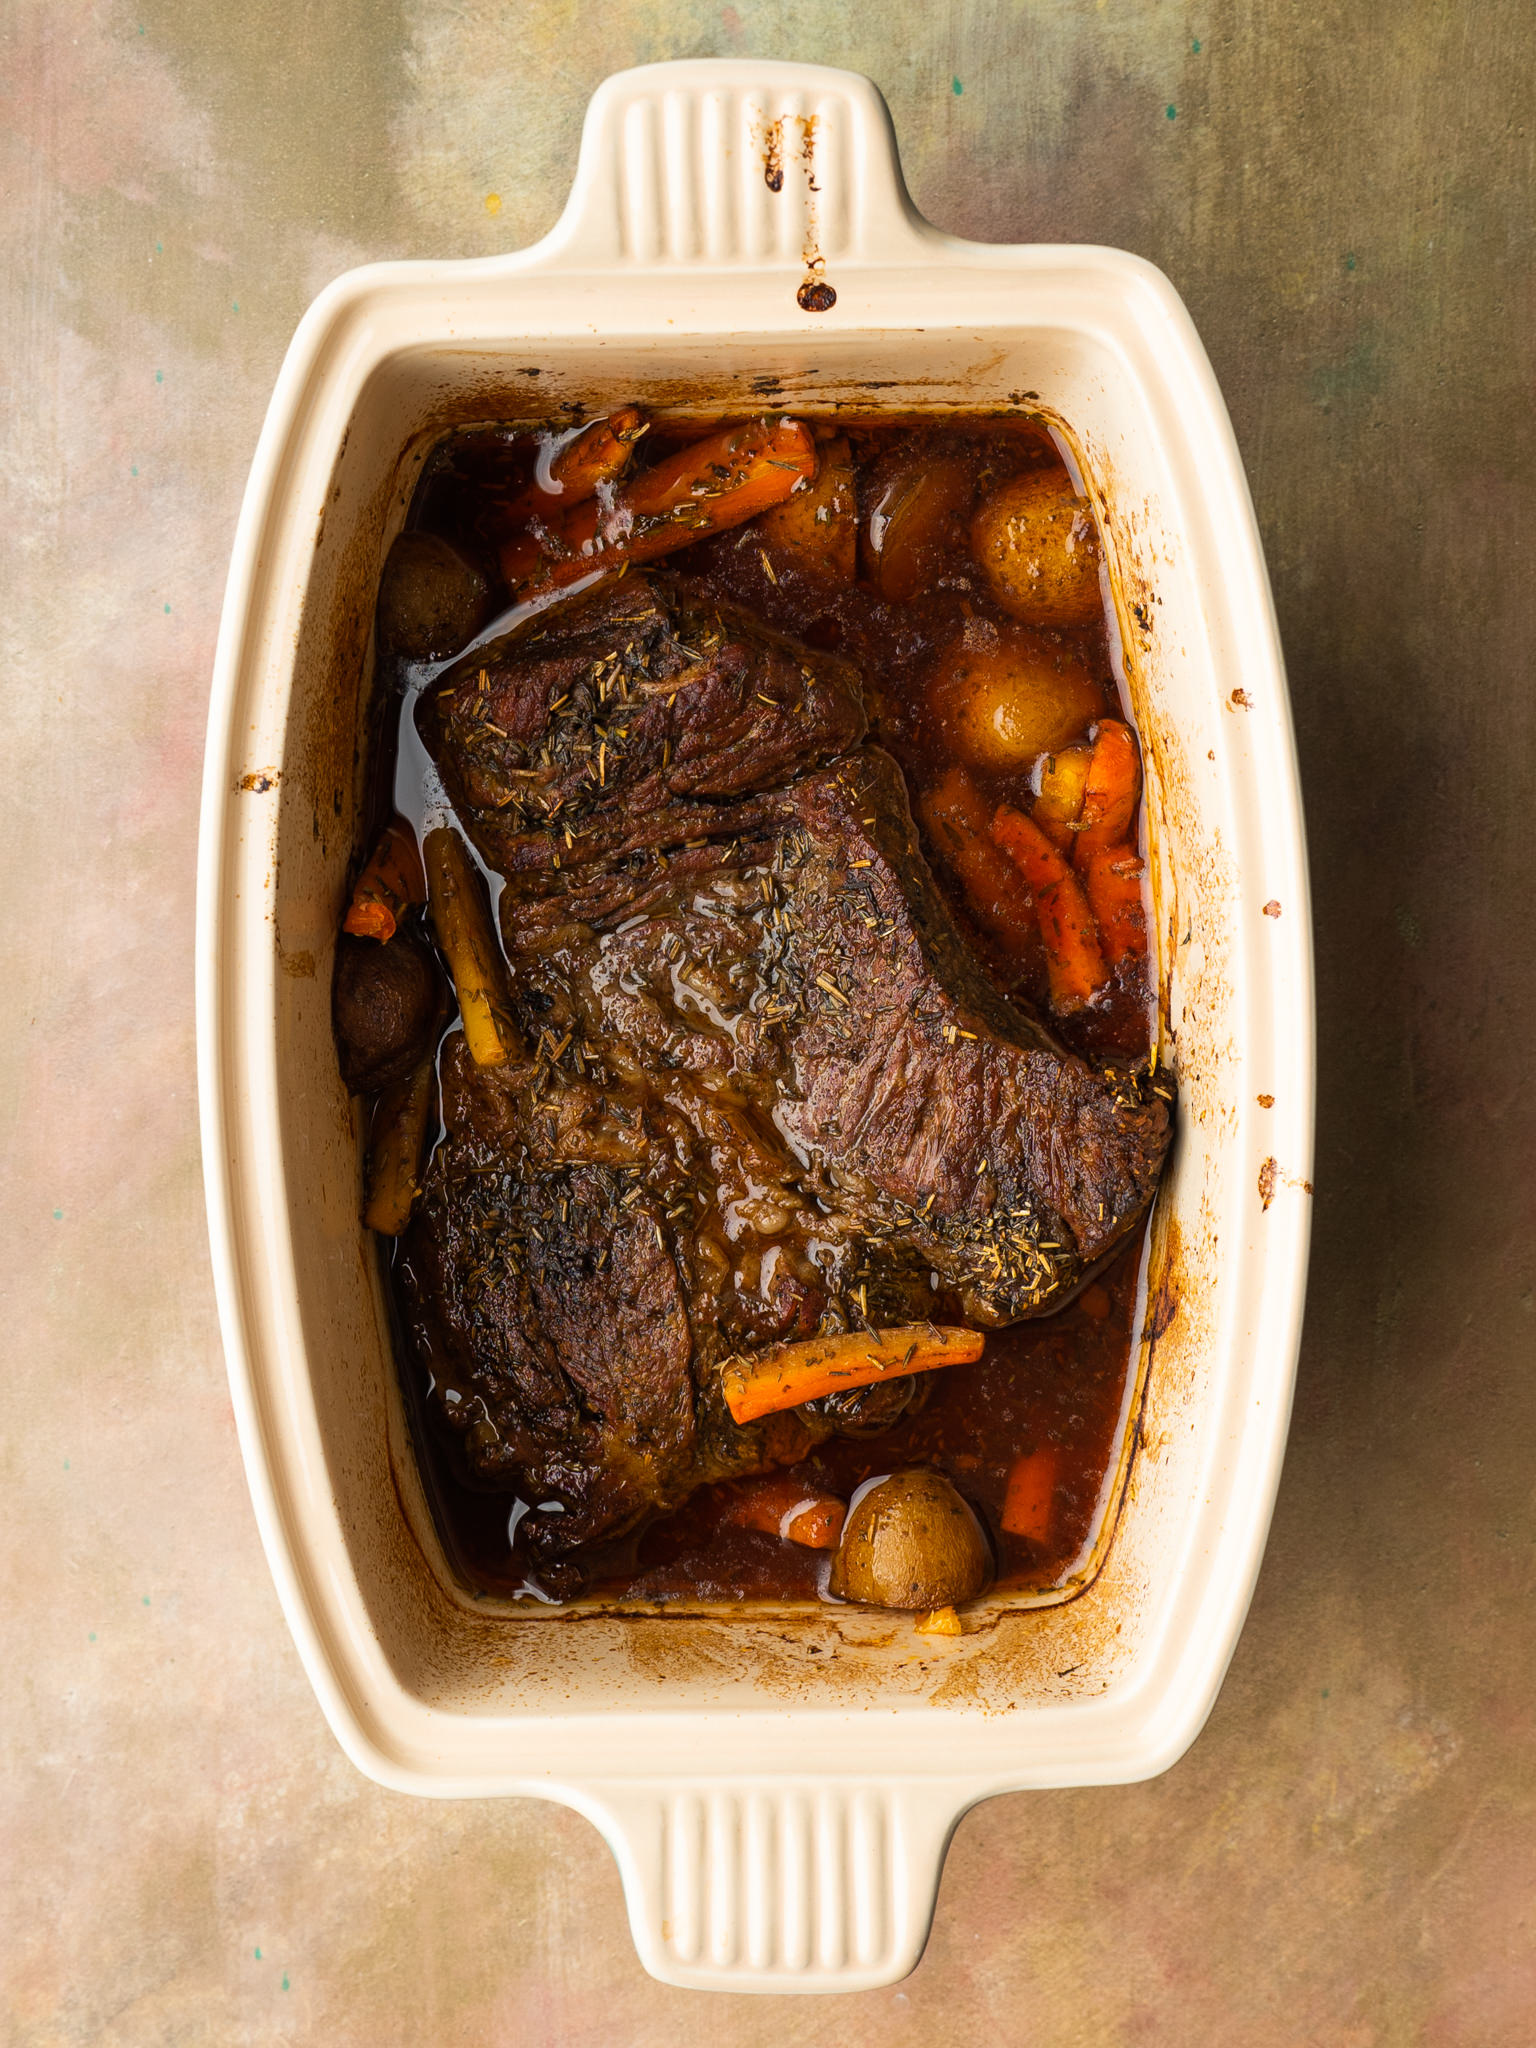 Above view of chuck roast, potatoes, and carrots in a roasting pan